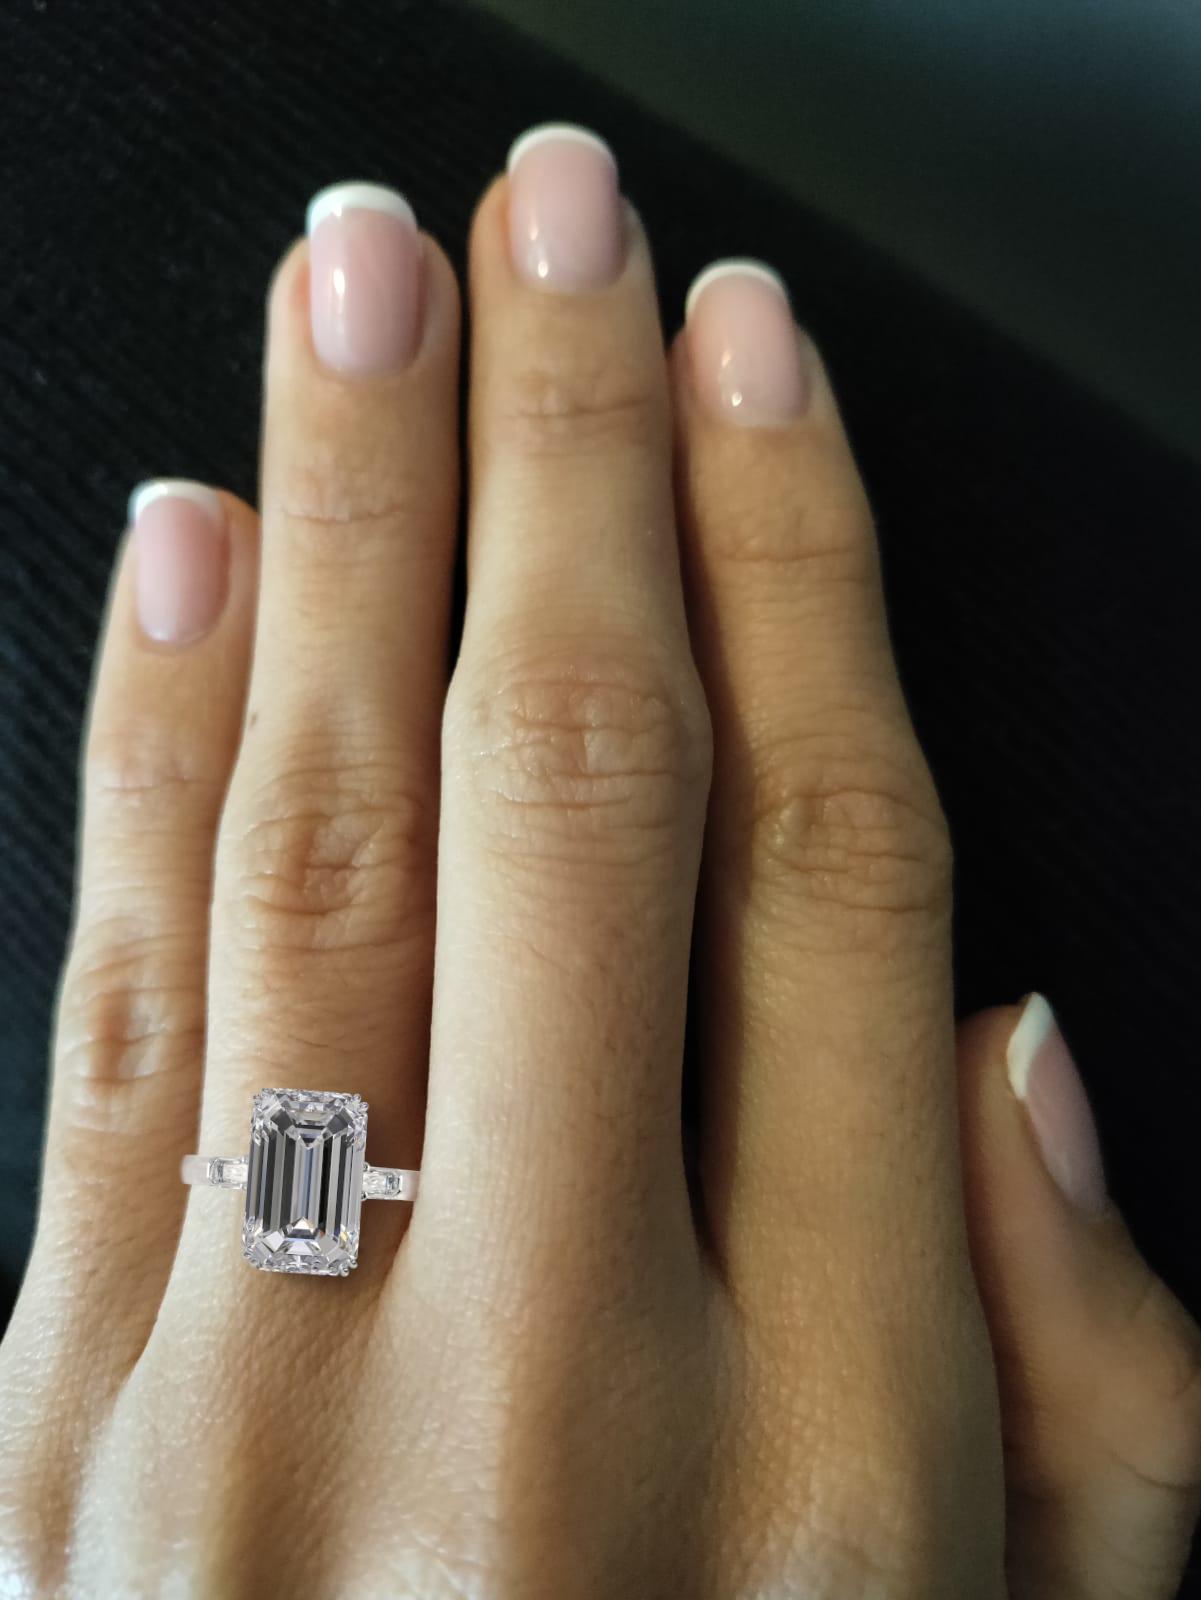 Exquisite Antinori Fine Jewels engagement ring crafted in platinum, featuring an exceptional GIA certified long emerald cut diamond weighing 3.01 carats, H color, VVS2 clarity. The ring has perfect proportions having.

This spectacular diamond